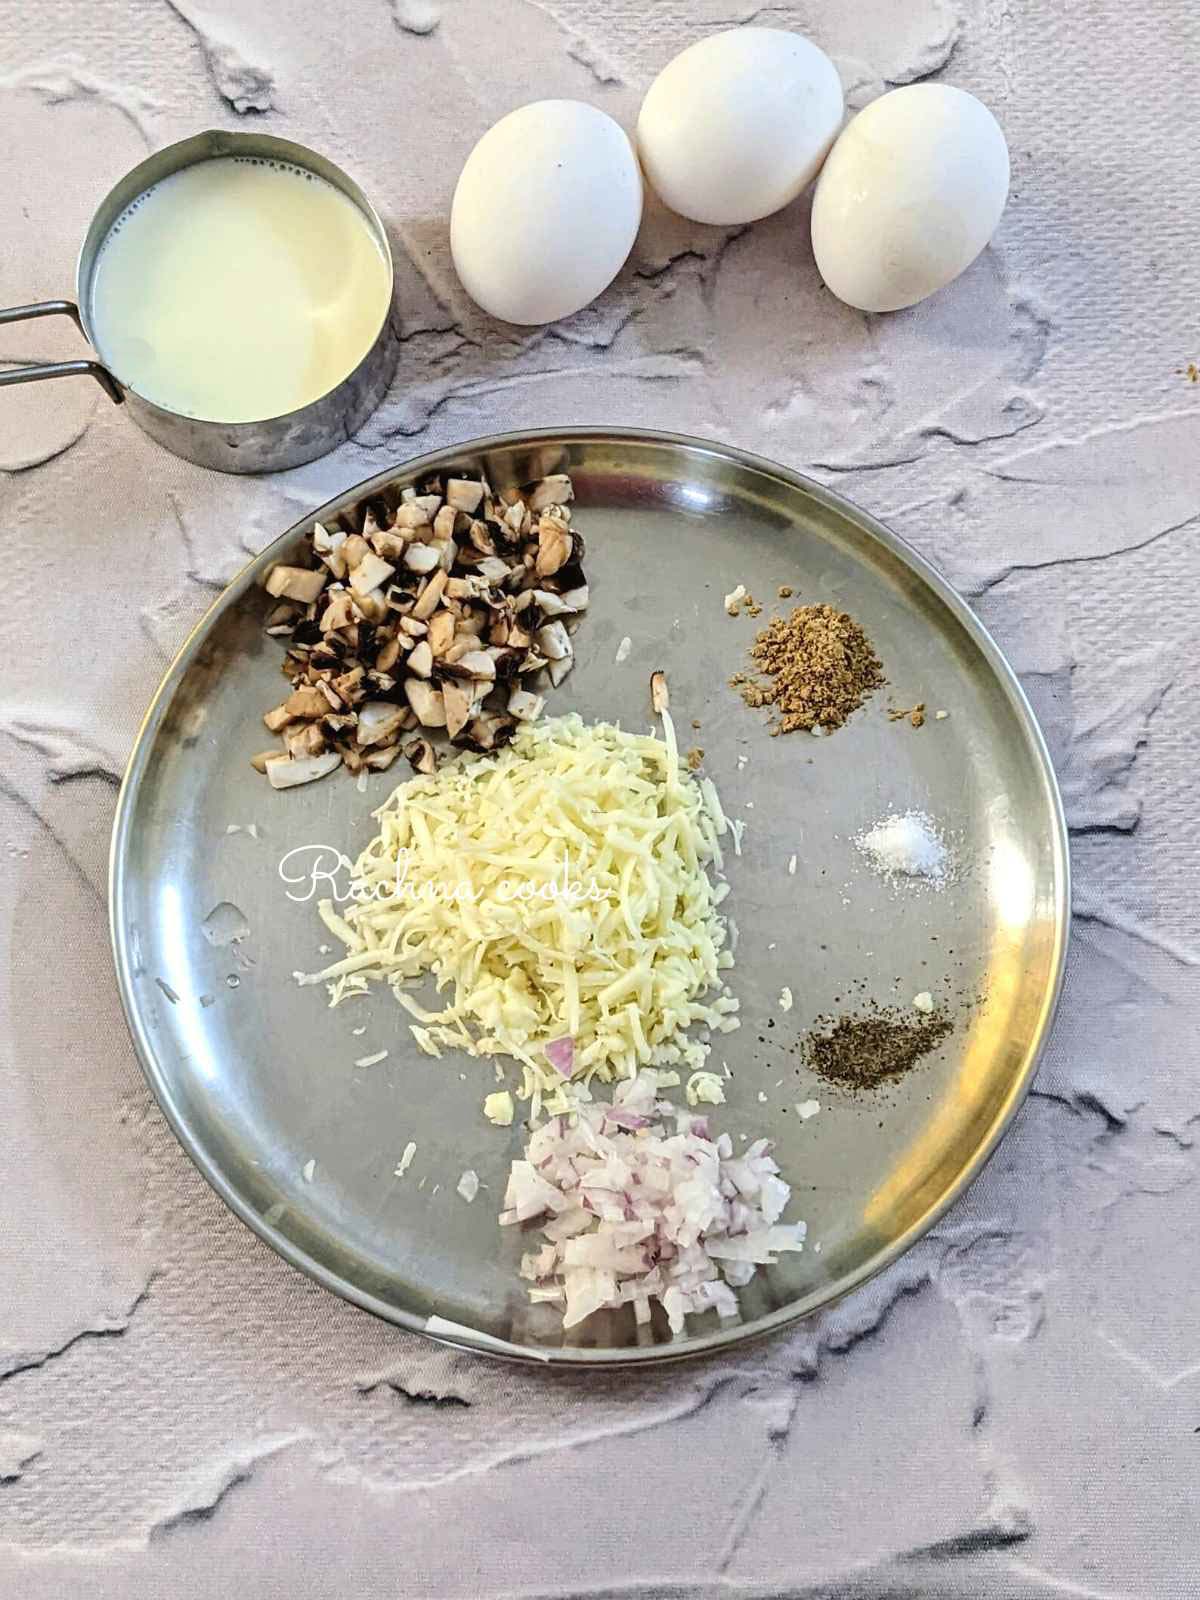 Milk, eggs, cheese, mushroom, chopped onion and spices in the frame.